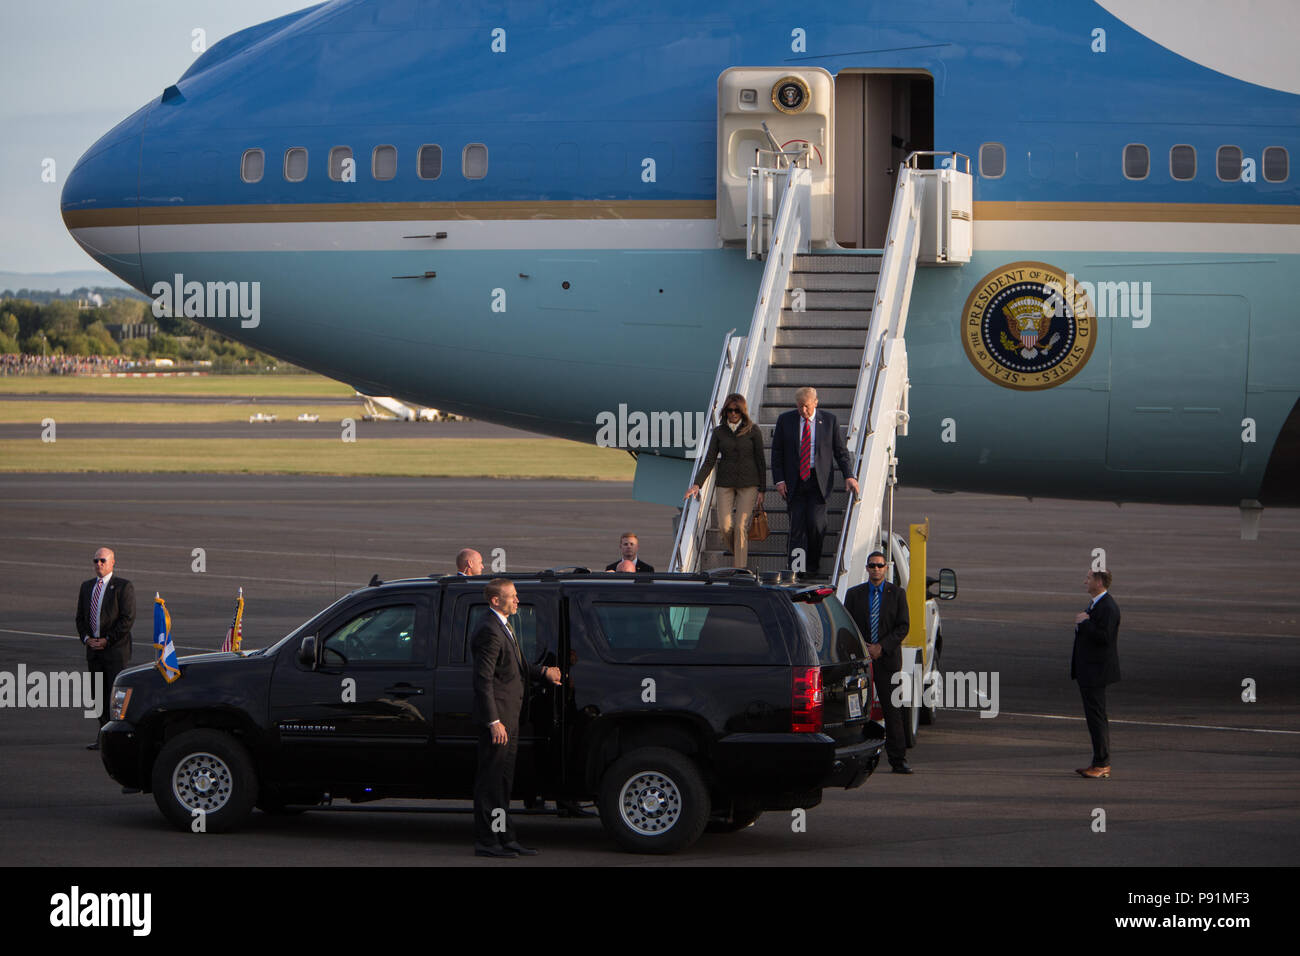 Prestwick, Scotland, on 13 July 2018. President Donald Trump, and wife Melania, arrive on Air Force One at Glasgow Prestwick International Airport at the start of a two day trip to Scotland. Image Credit: Jeremy Sutton-Hibbert/ Alamy News. Stock Photo